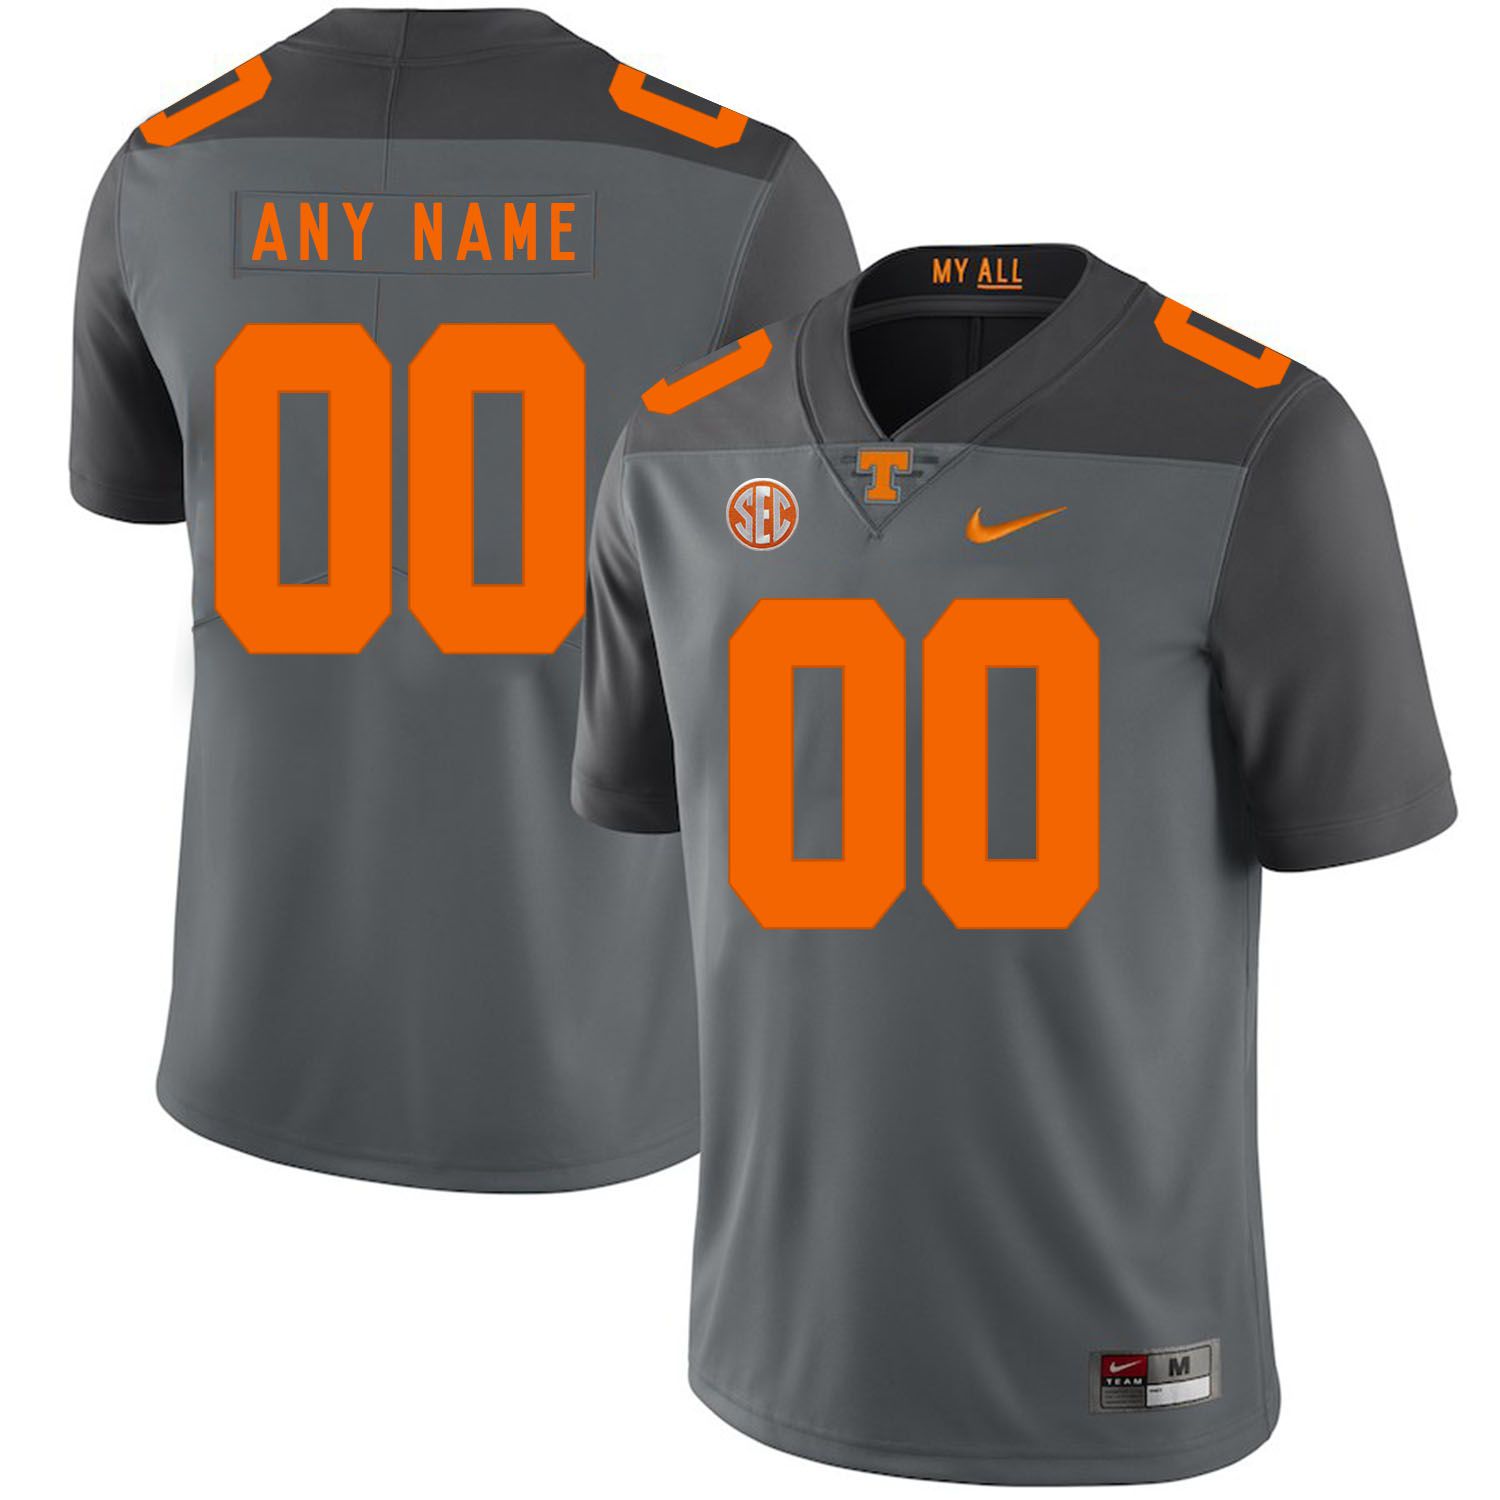 Men Tennessee Volunteers #00 Any name Grey Customized NCAA Jerseys